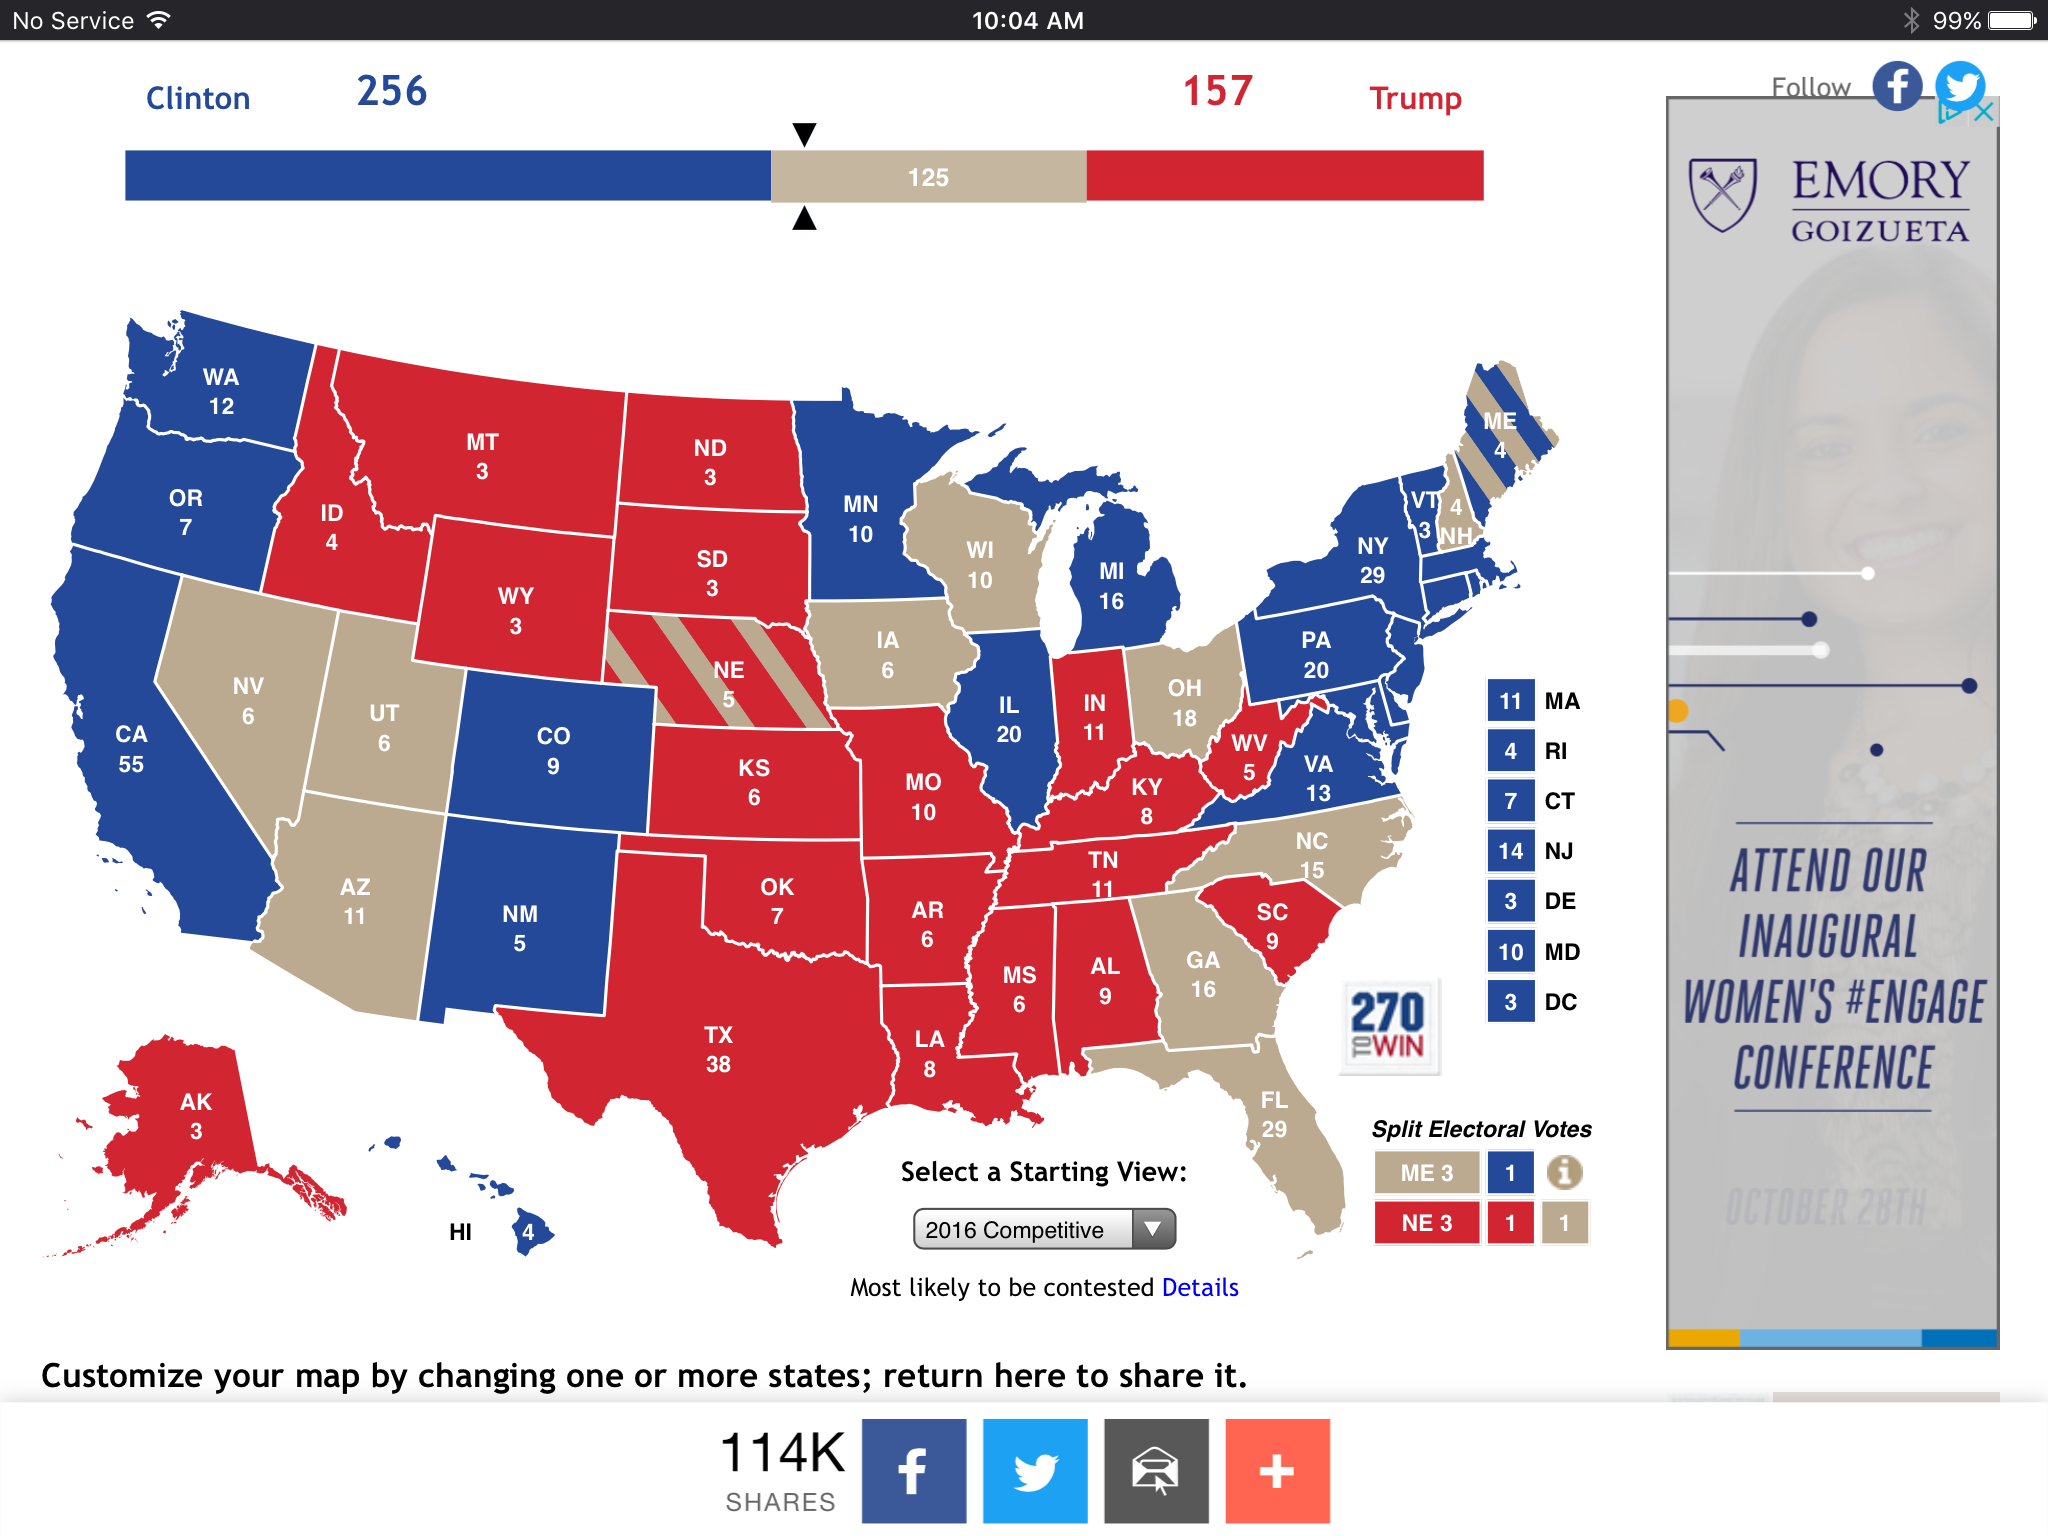 To win the presidency - one must have 270 electoral votes. Its not even close.